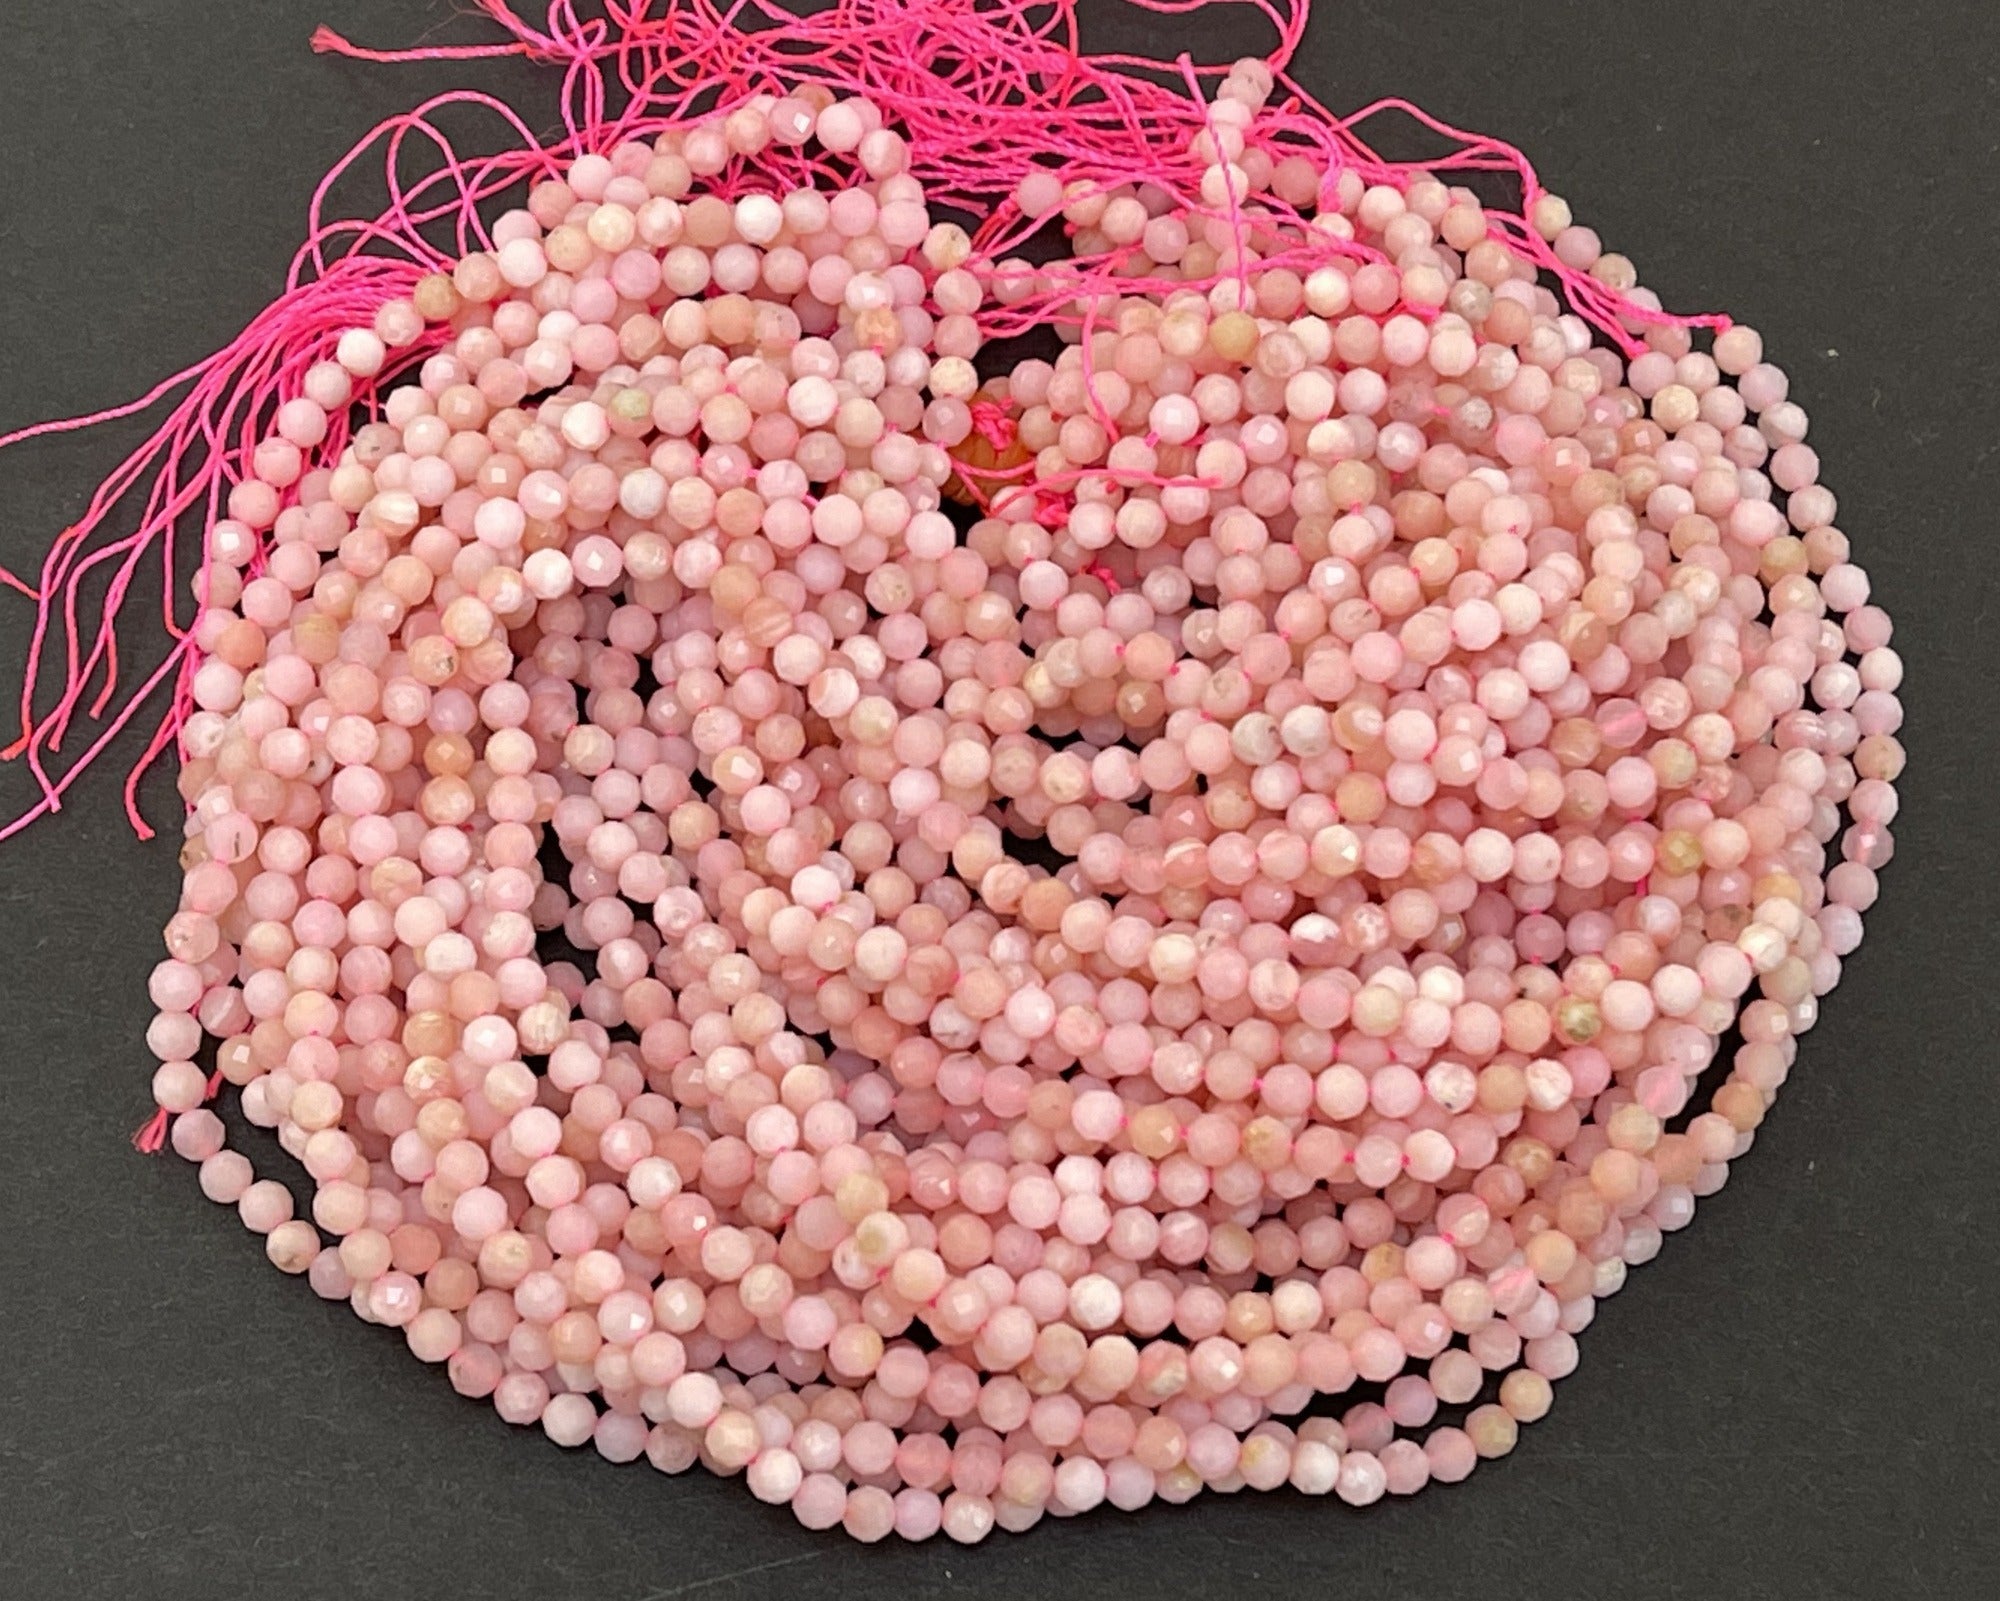 Peruvian Pink Opal 3mm faceted round natural gemstone beads 15.5" strand